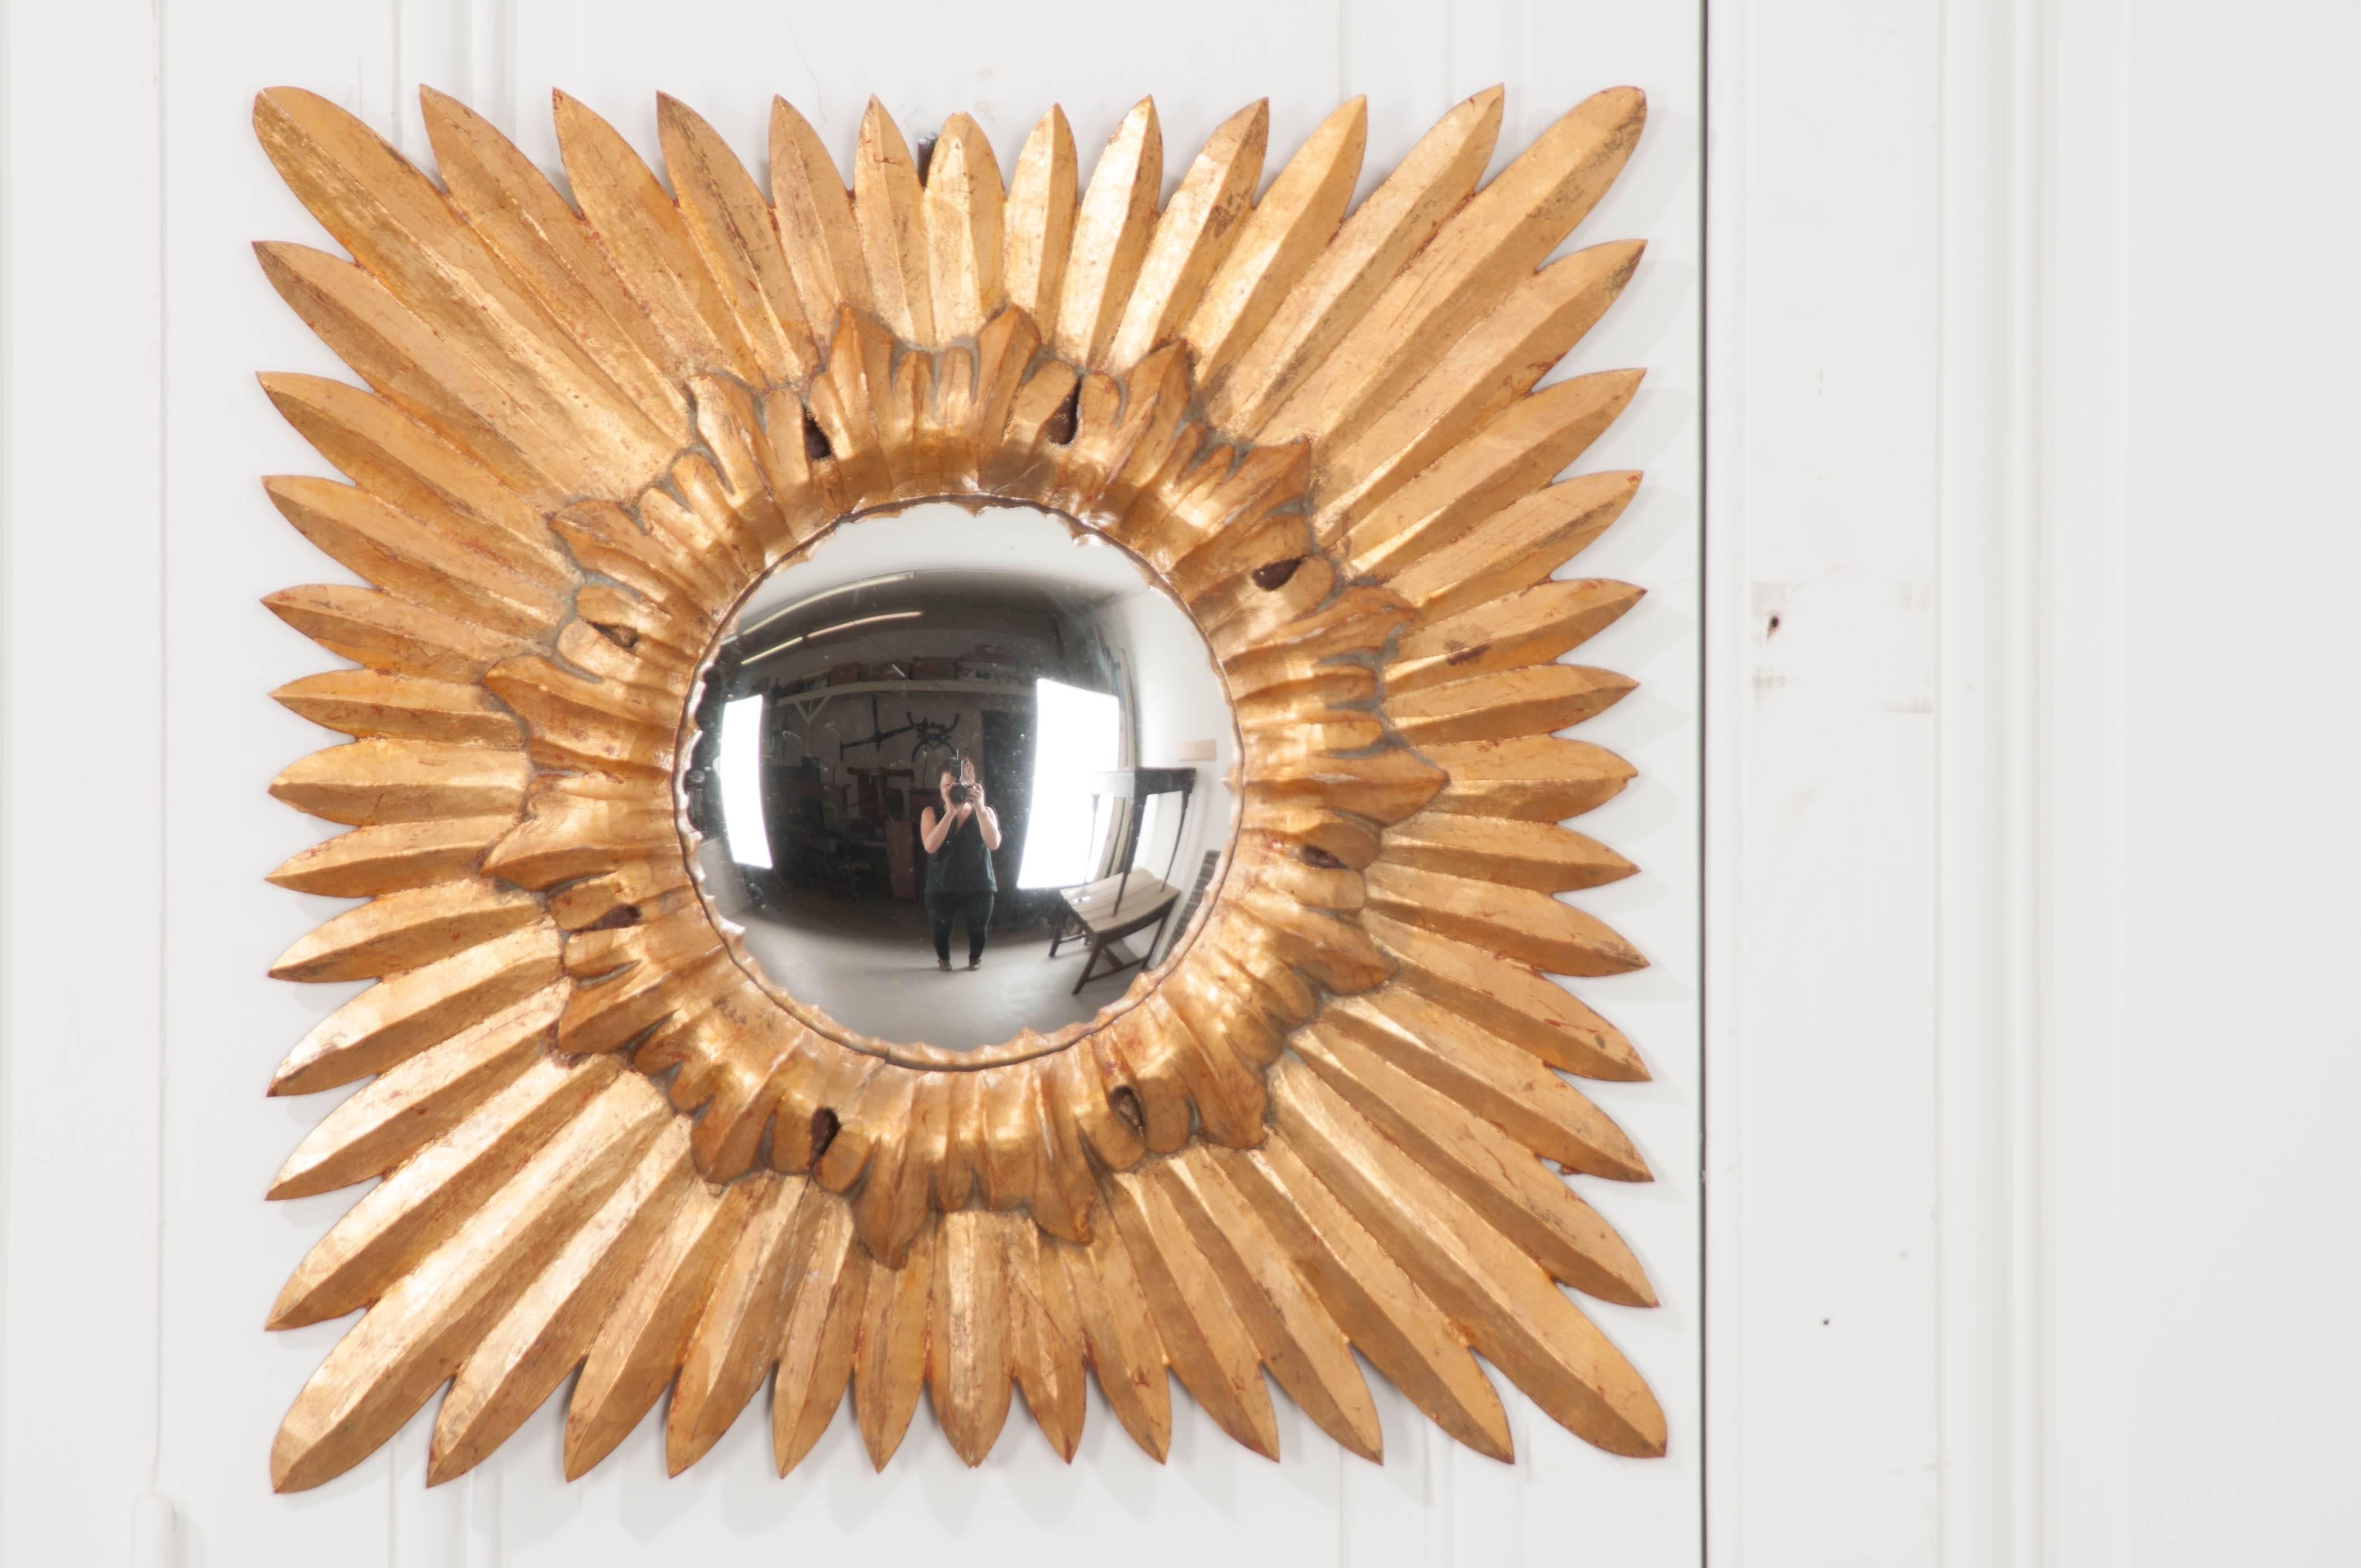 An exceptional gold gilt starburst mirror with convex glass from 19th century, France. Long gilt rays extend from behind the bulging circular mirror that has been encircled with beautifully carved gilt trim. This spectacular splash of gold would be